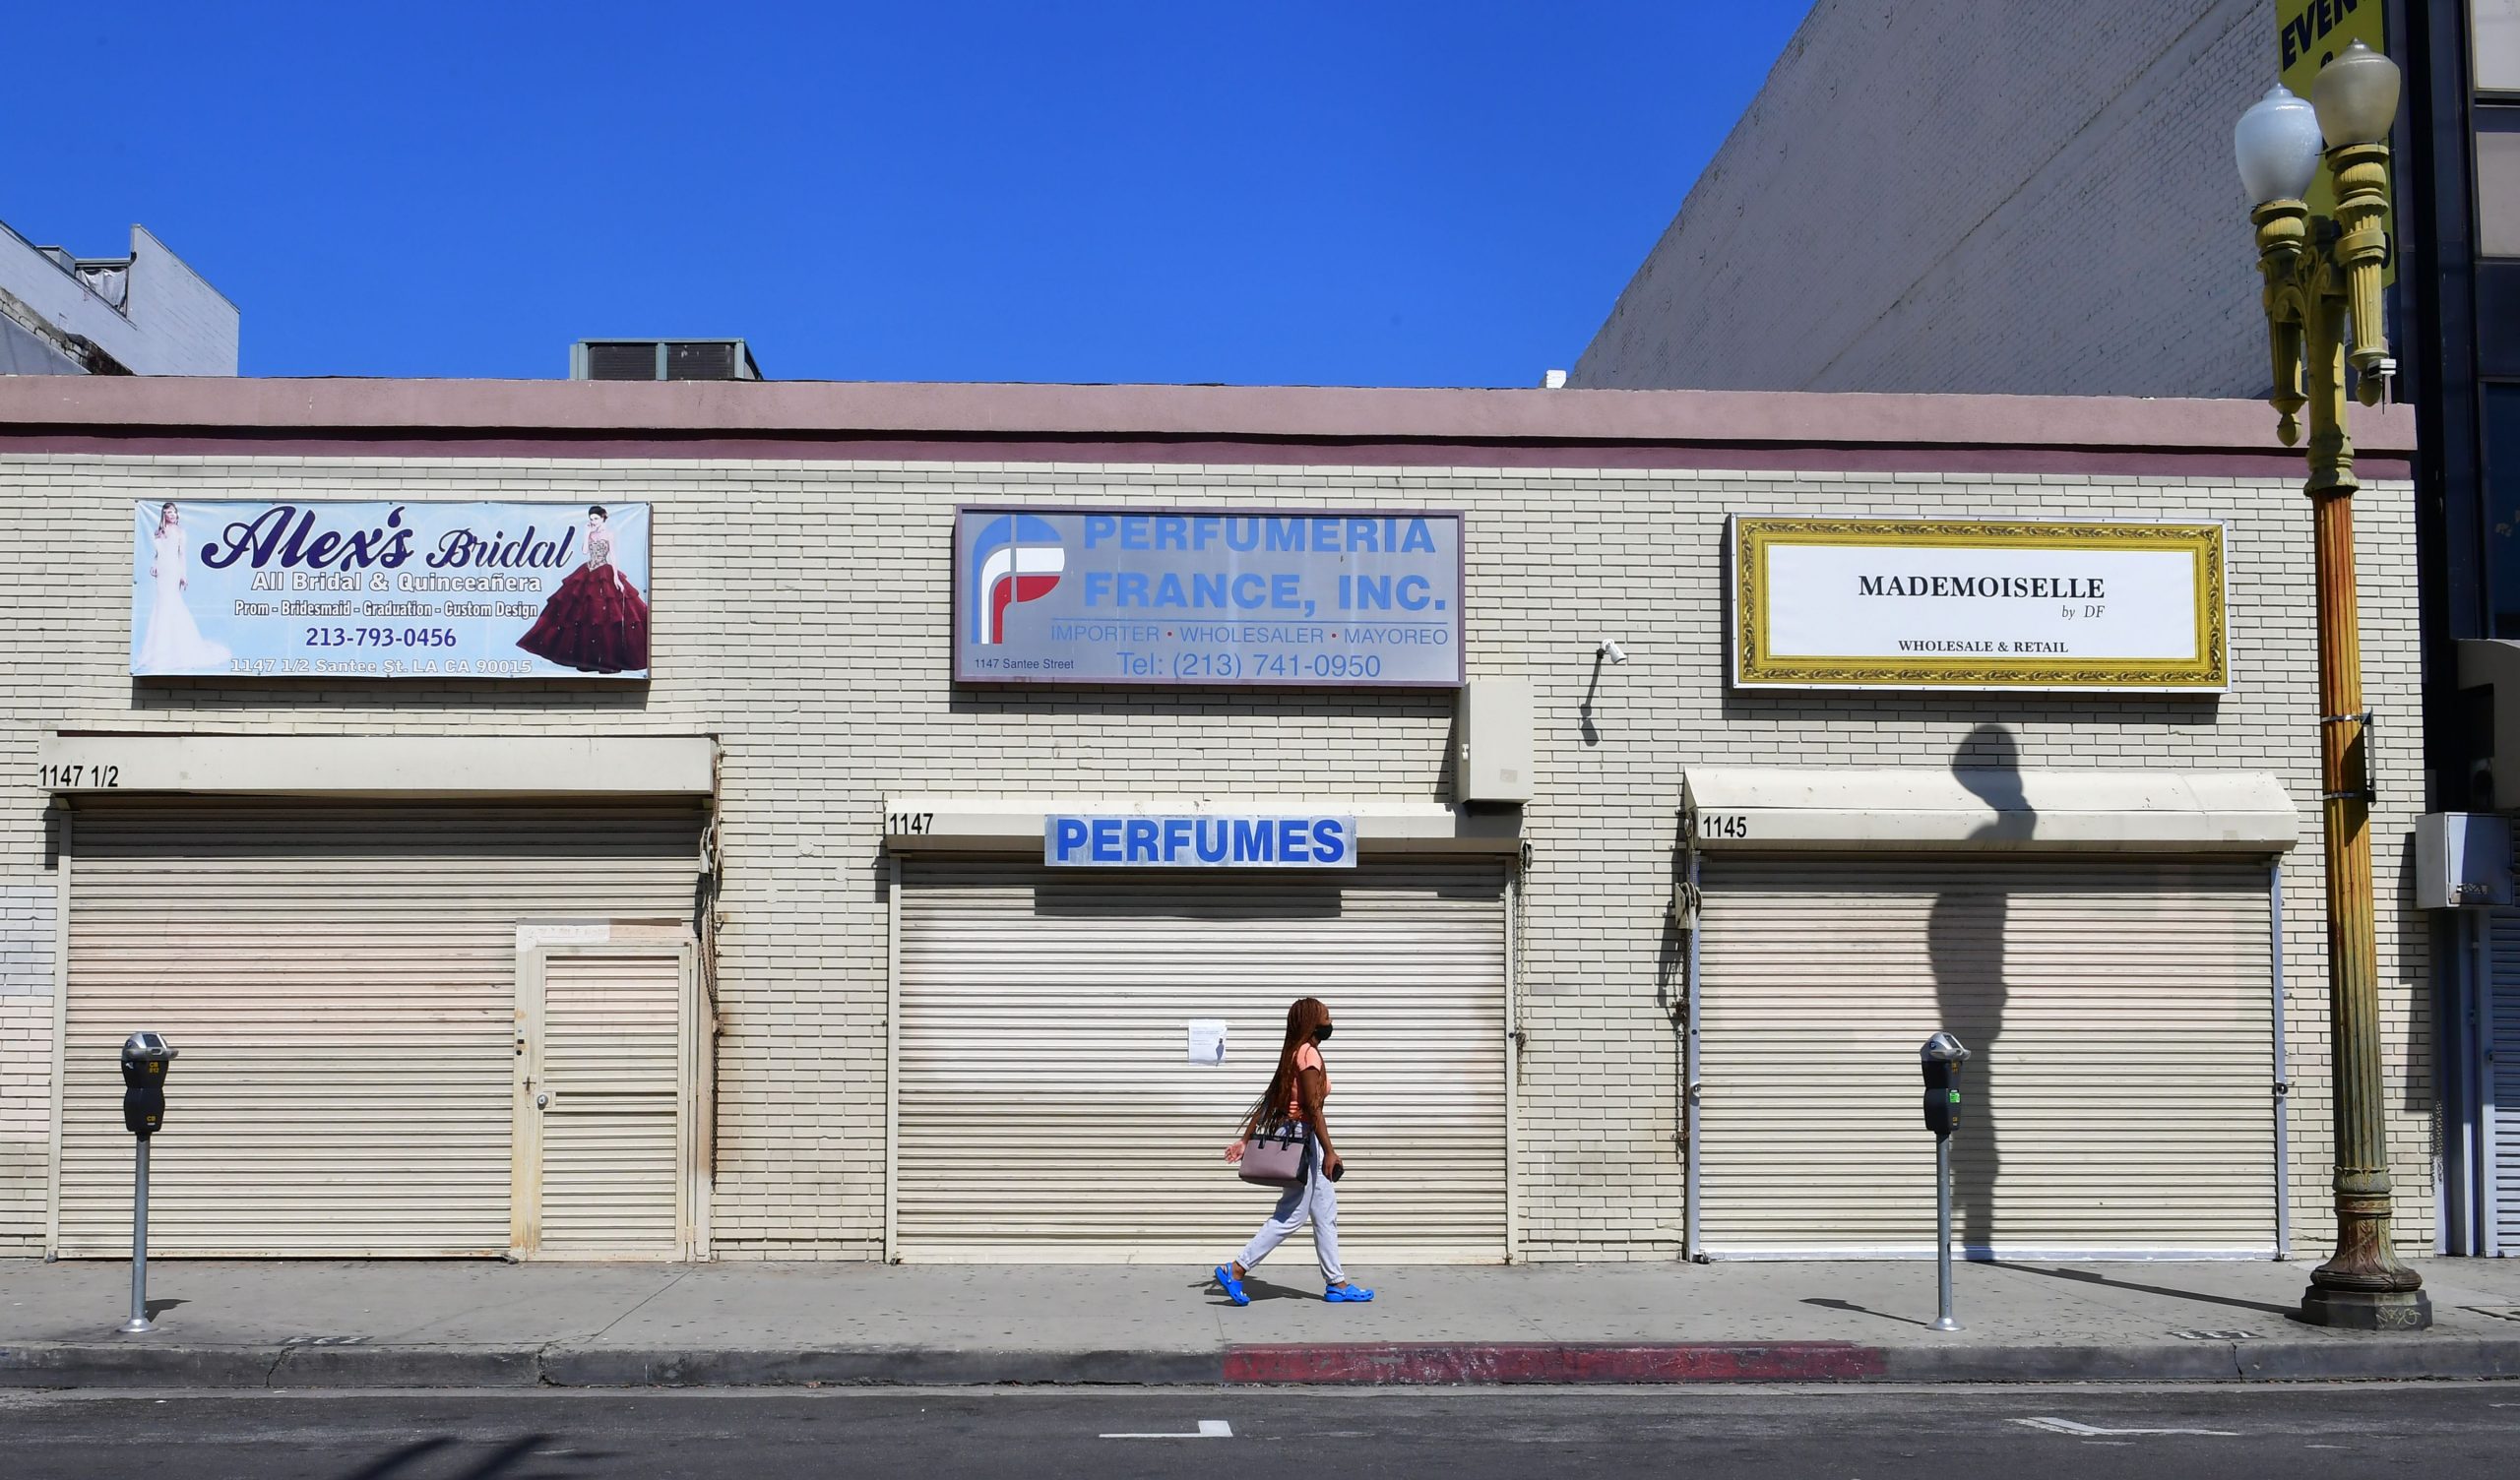 A woman walks past closed shopfronts in what would be a normally busy fashion district in Los Angeles, California on May 4, 2020. - California governor Gavin Newsom earlier today announced the gradual reopening of the state later this week as dismal US employment figures are expected with the release of figures Friday May 8 for April's US jobs report, as 30 million Americans filed for unemployment in the last six weeks. (Photo by Frederic J. BROWN / AFP) (Photo by FREDERIC J. BROWN/AFP via Getty Images)